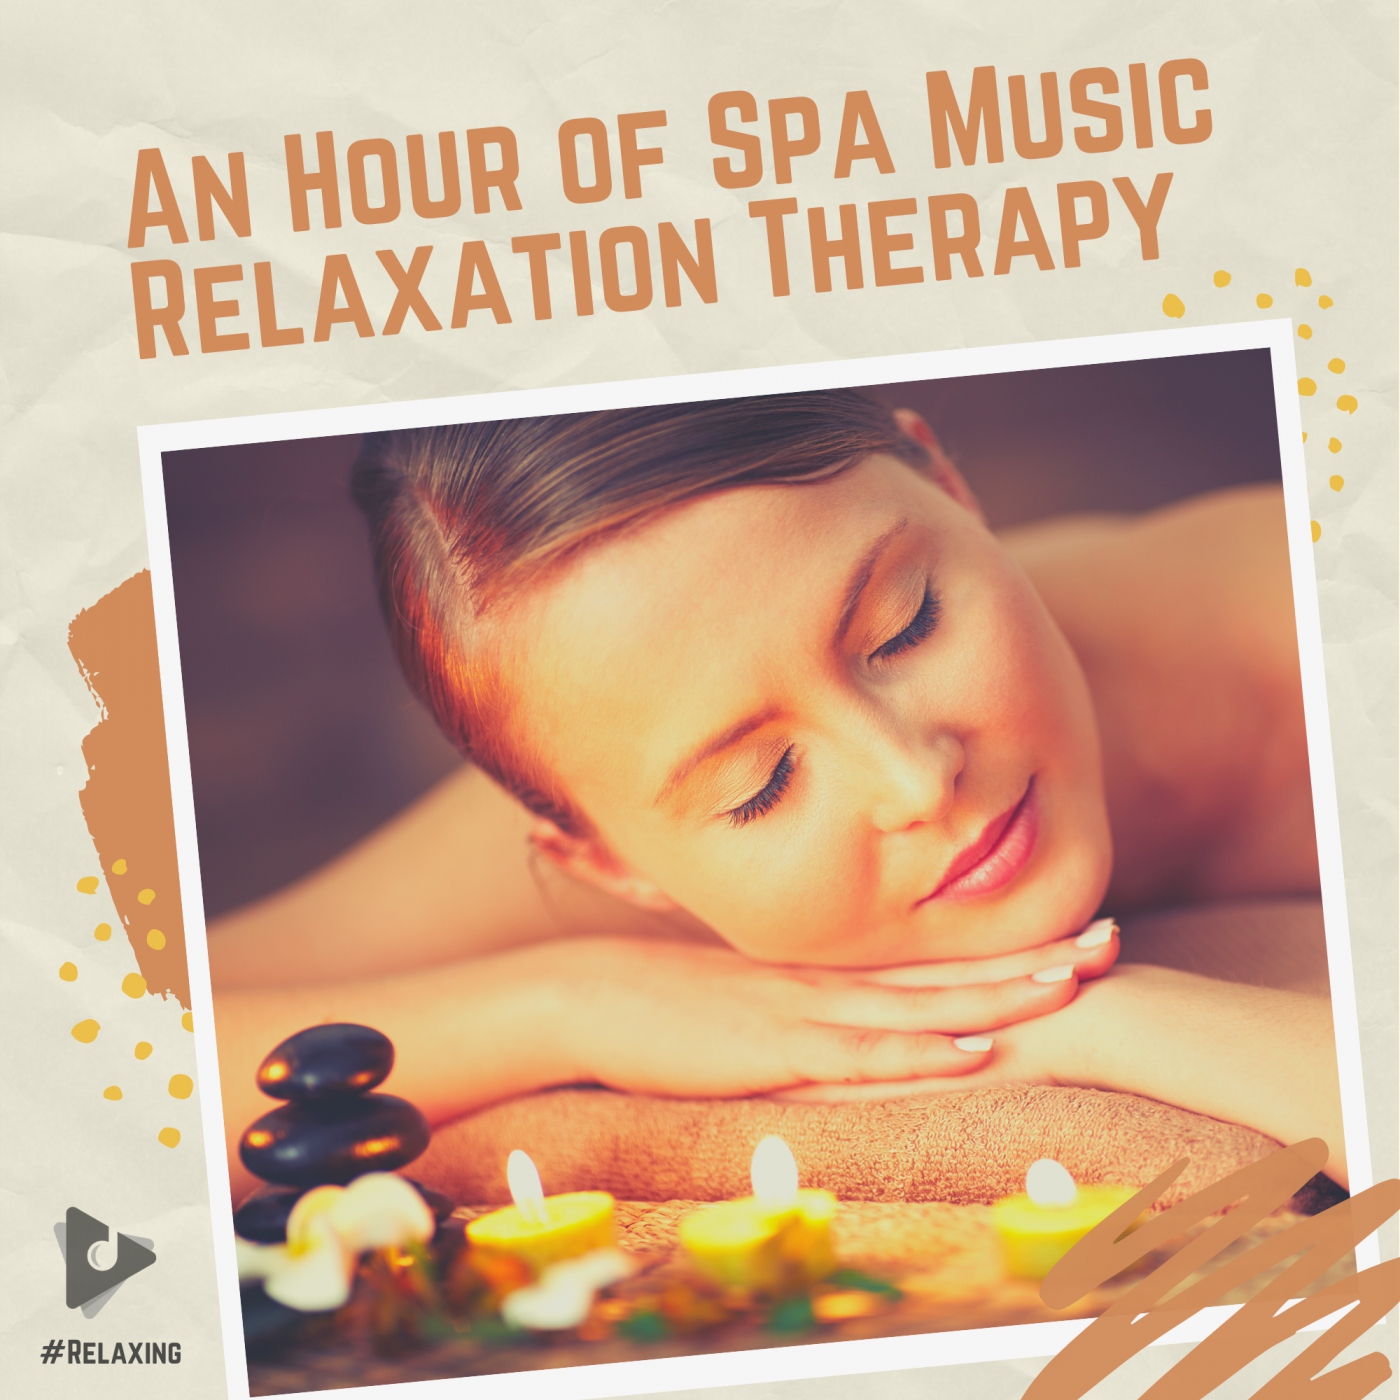 An Hour of Spa Music Relaxation Therapy